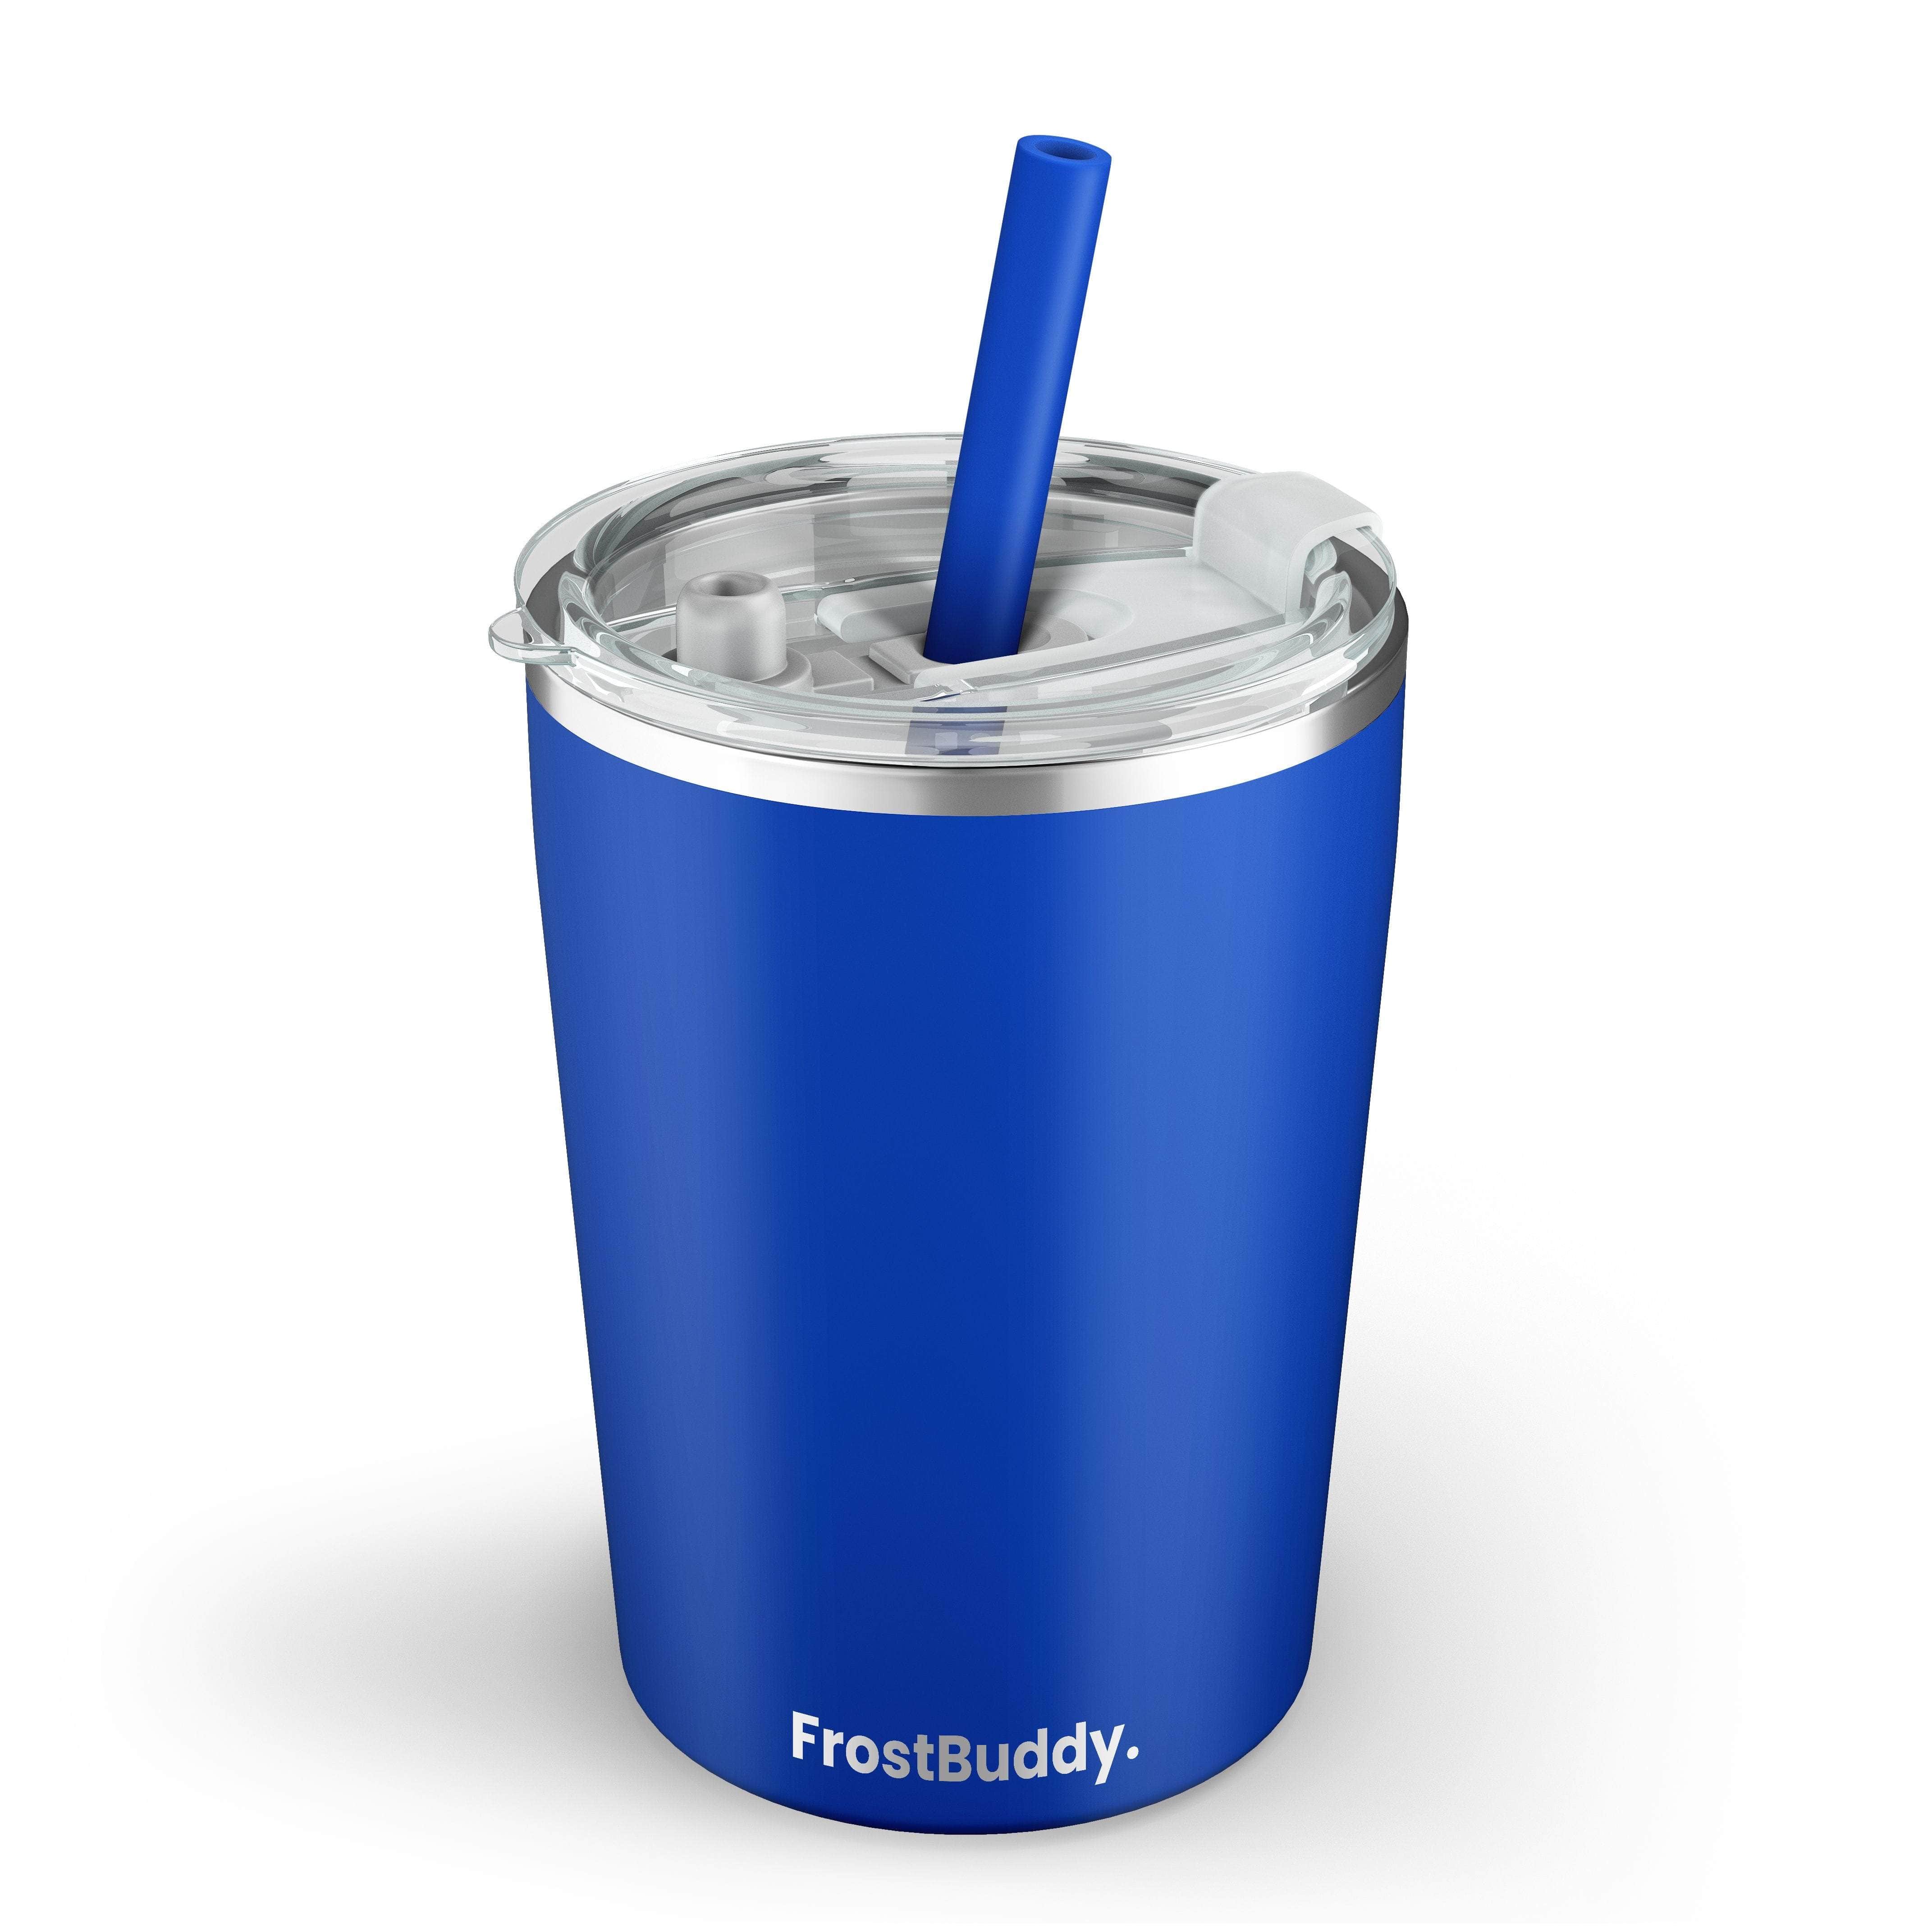  Universal Buddy XL Can Cooler by Frost Buddy - Fits 12